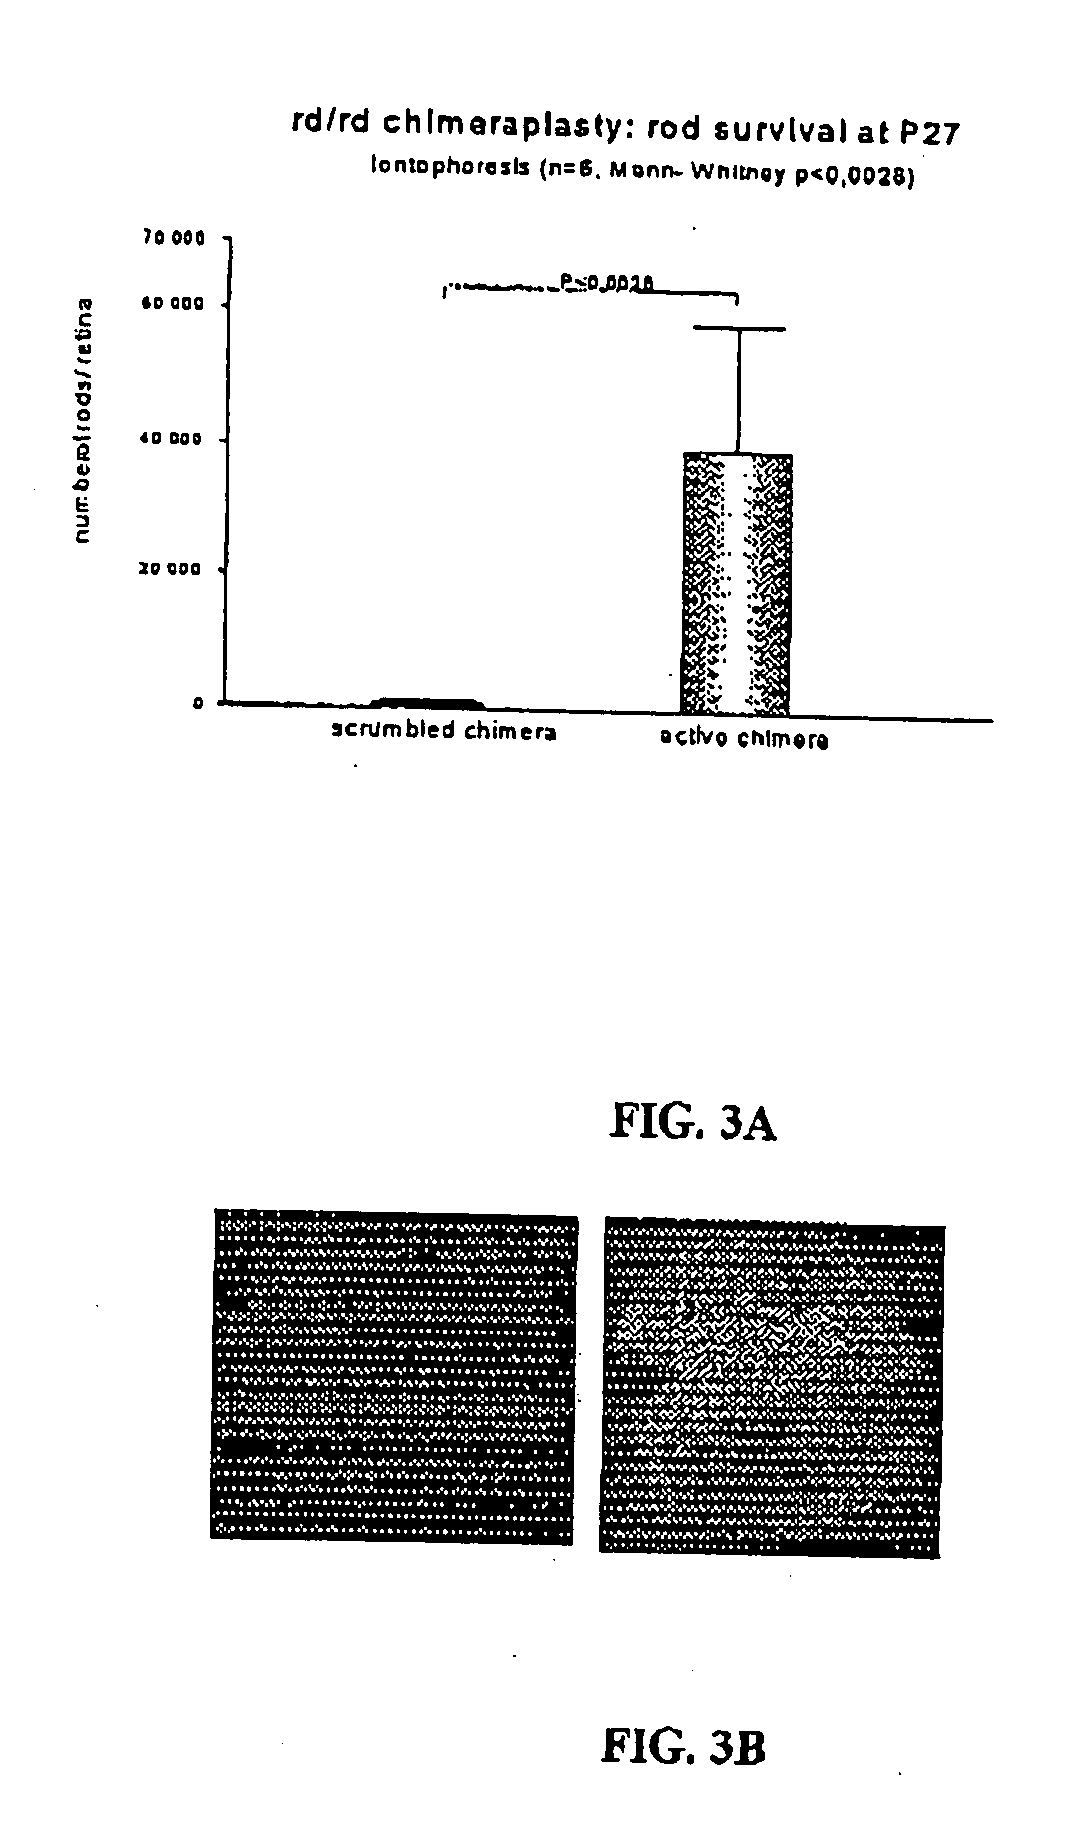 Gene therapy with chimeric oligonucleotides delivered by a method comprising a step of iontophoresis